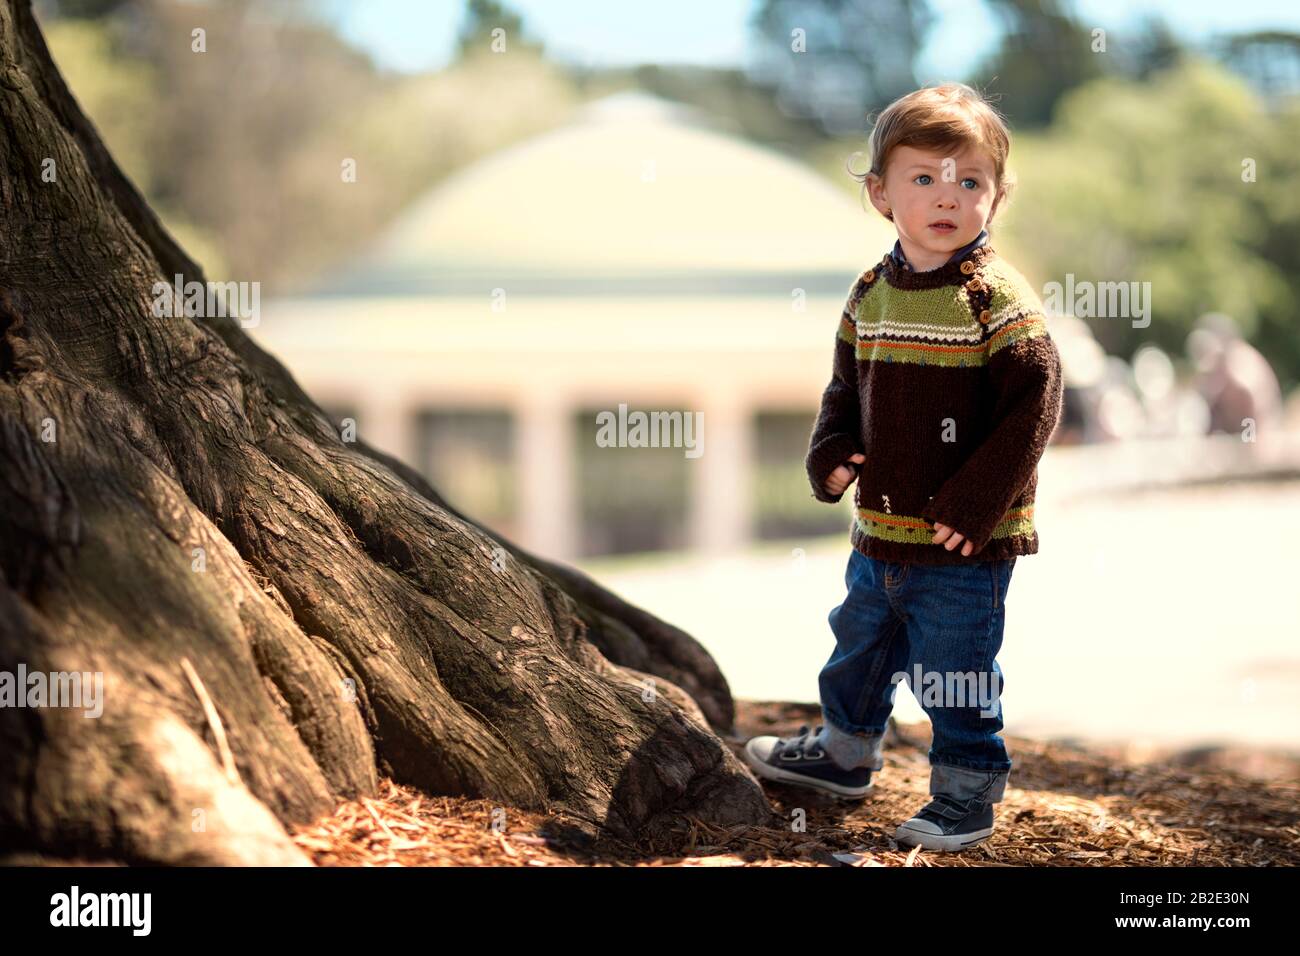 Young boy standing by a tree Stock Photo